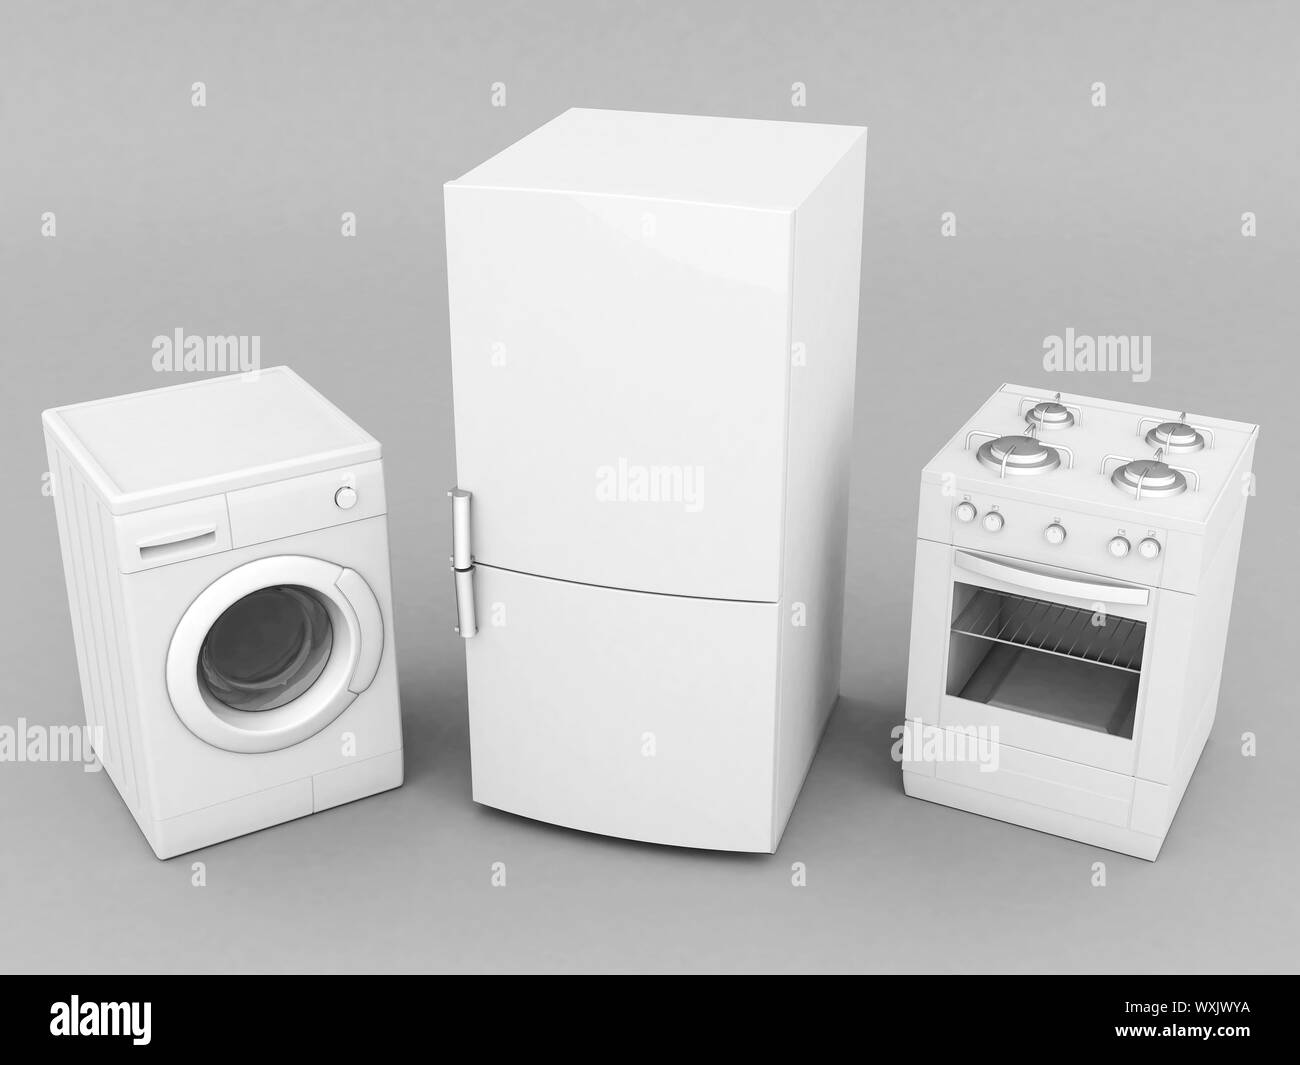 picture of household appliances on a gray background Stock Photo